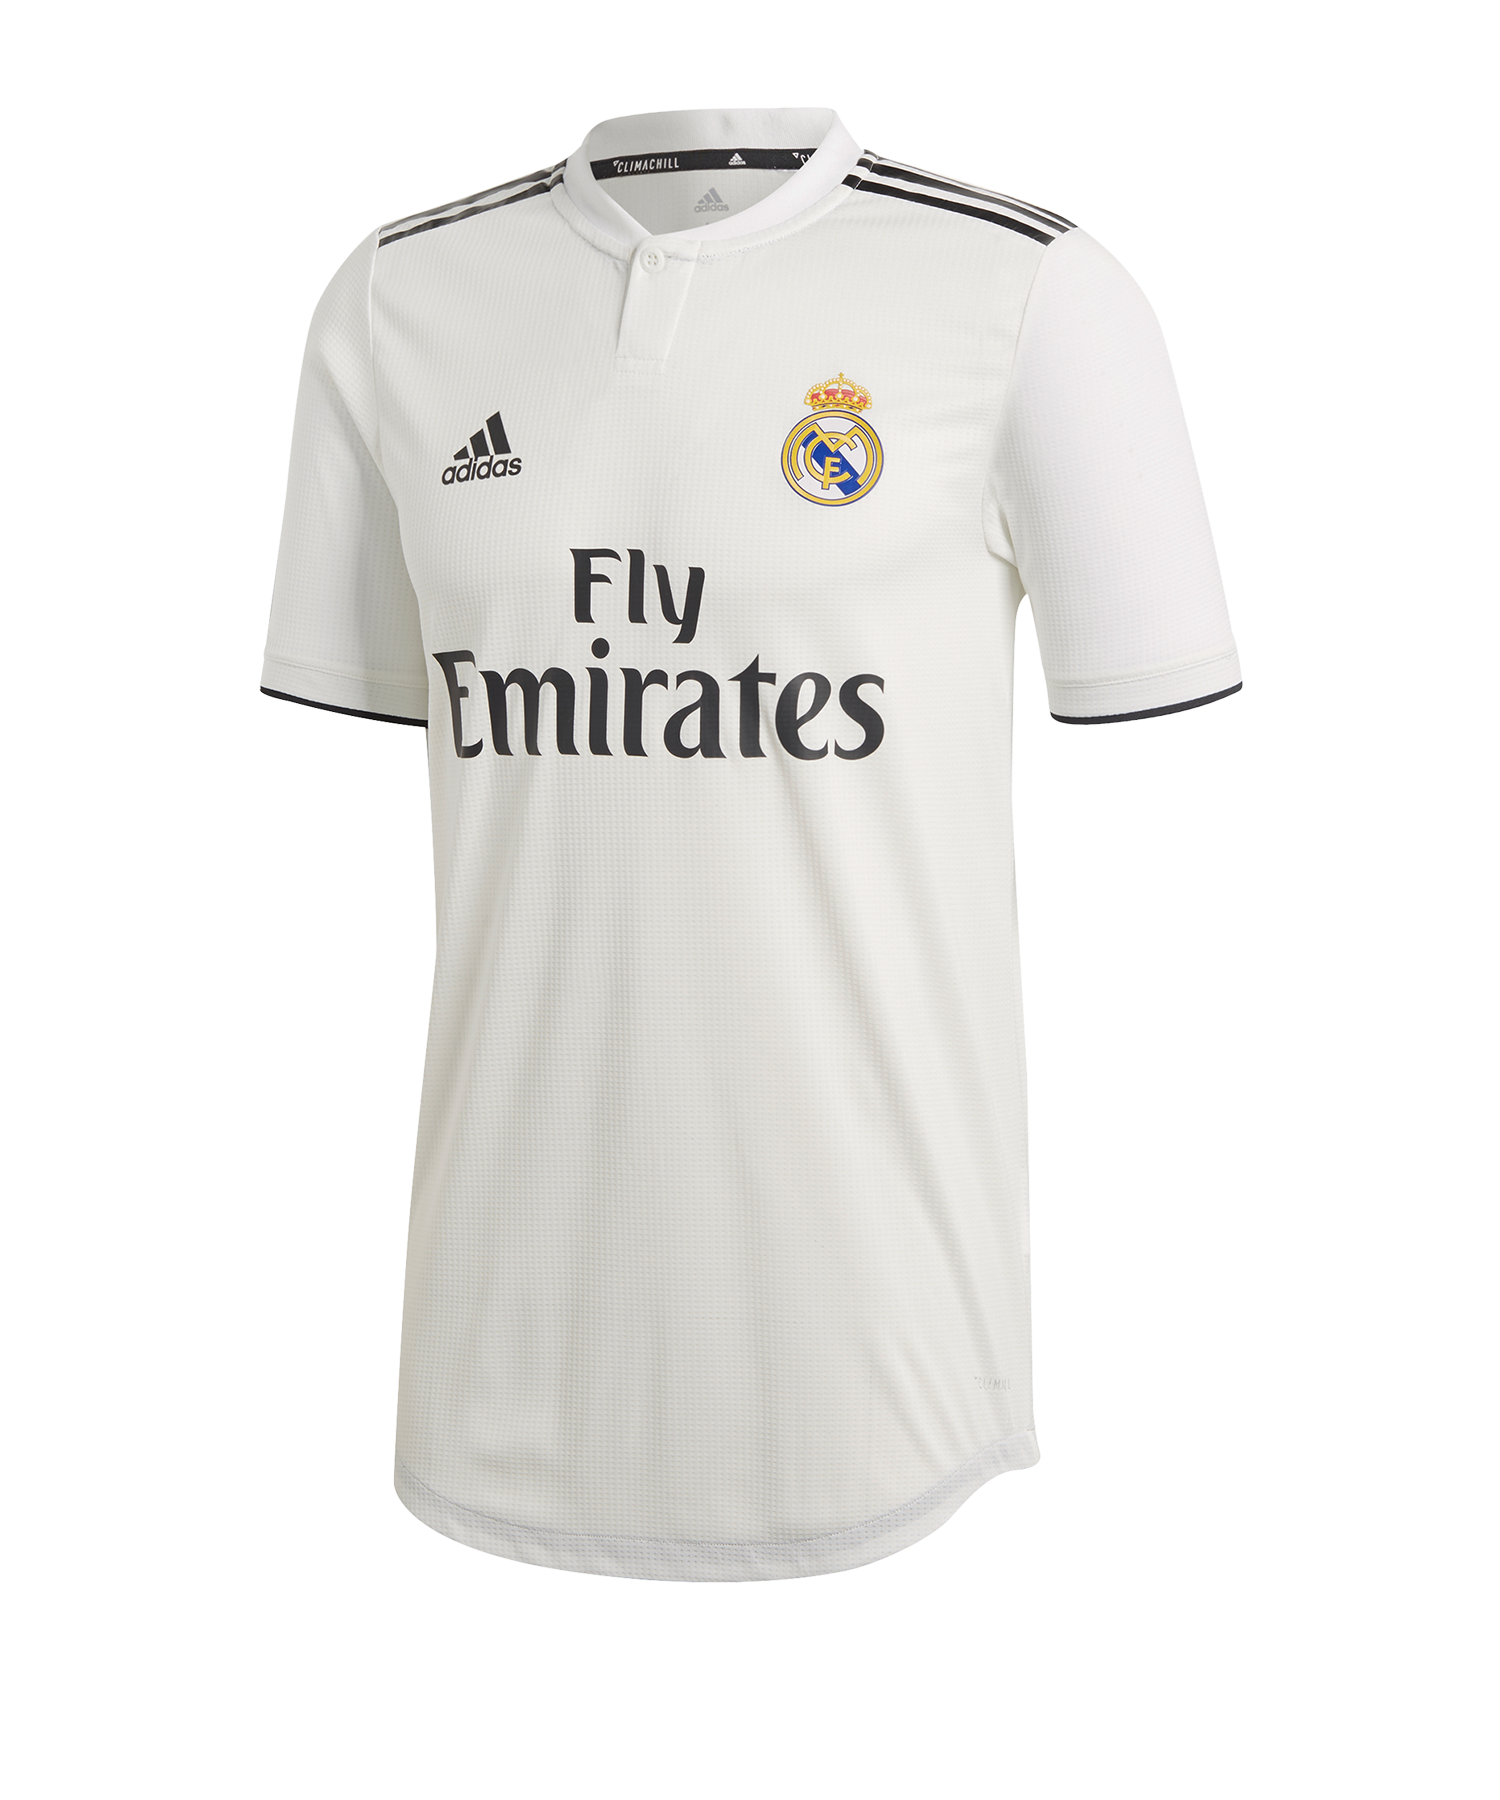 Real Madrid Home & Away Kits for 2018/2019